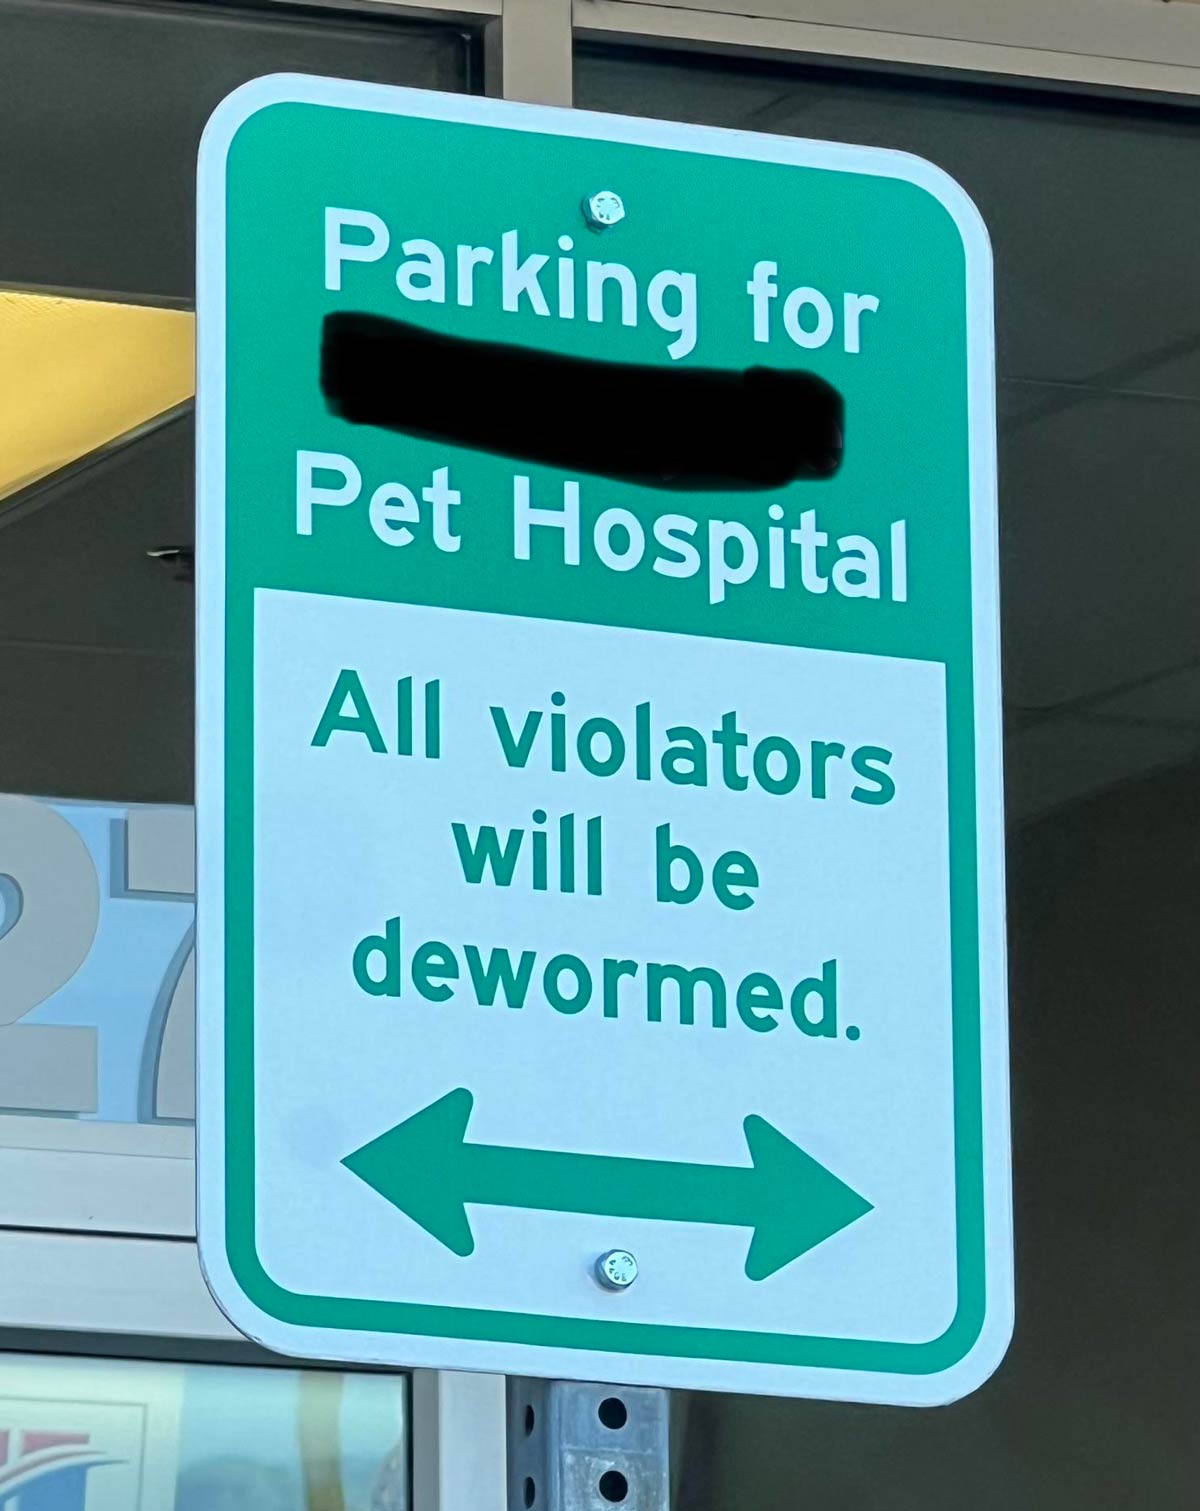 This parking sign at my vet's office